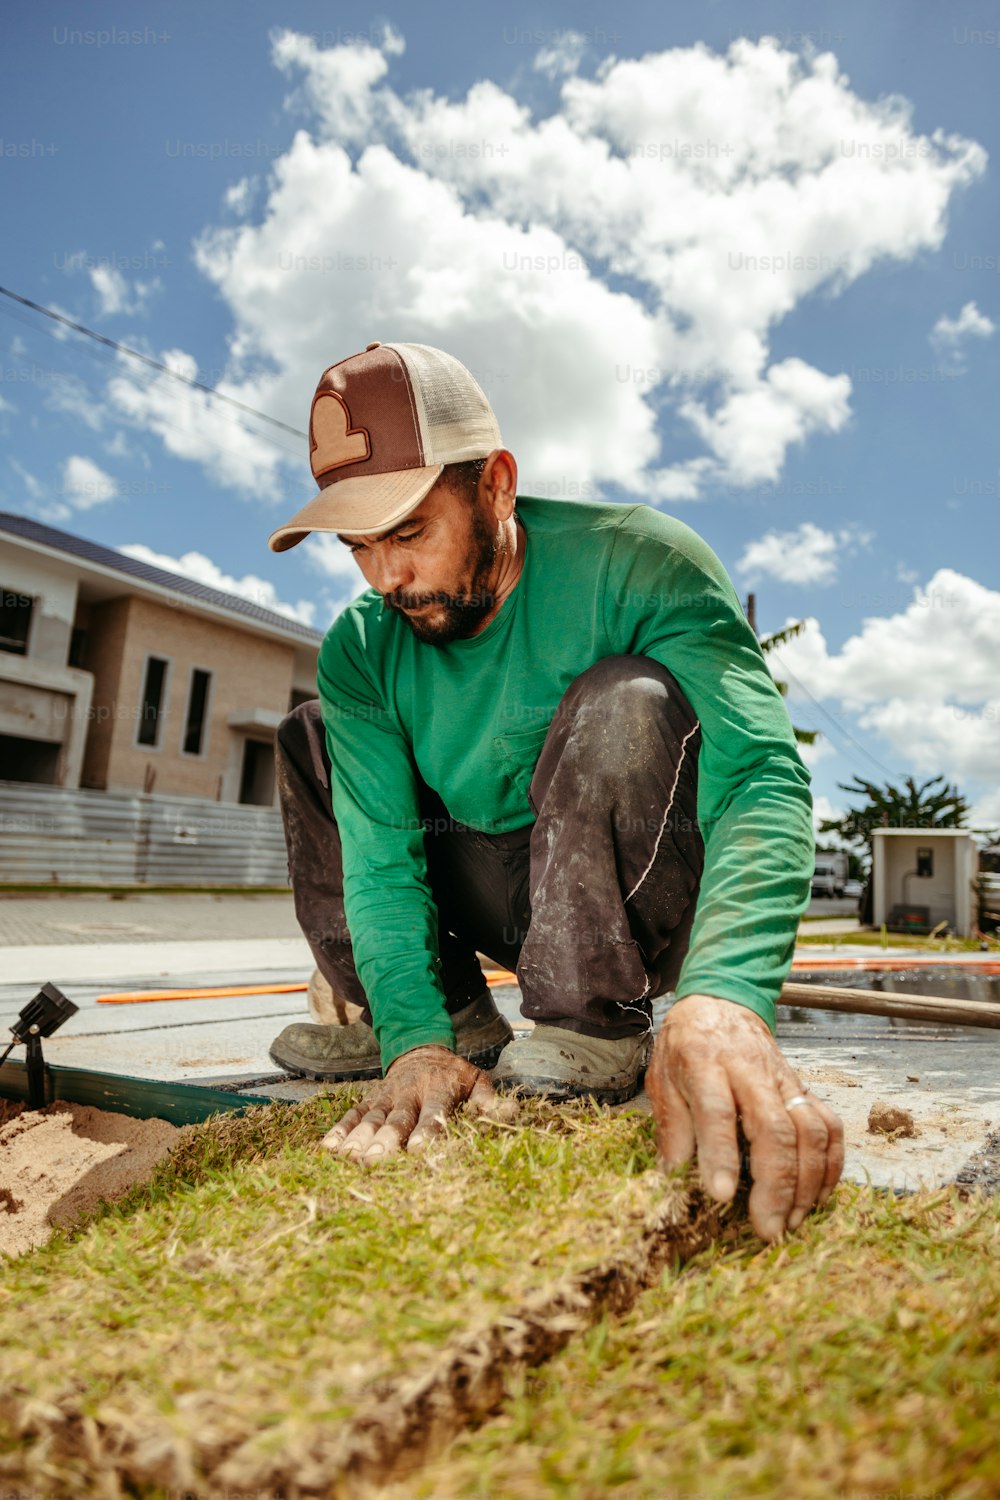 a man in a green shirt and hat working on grass